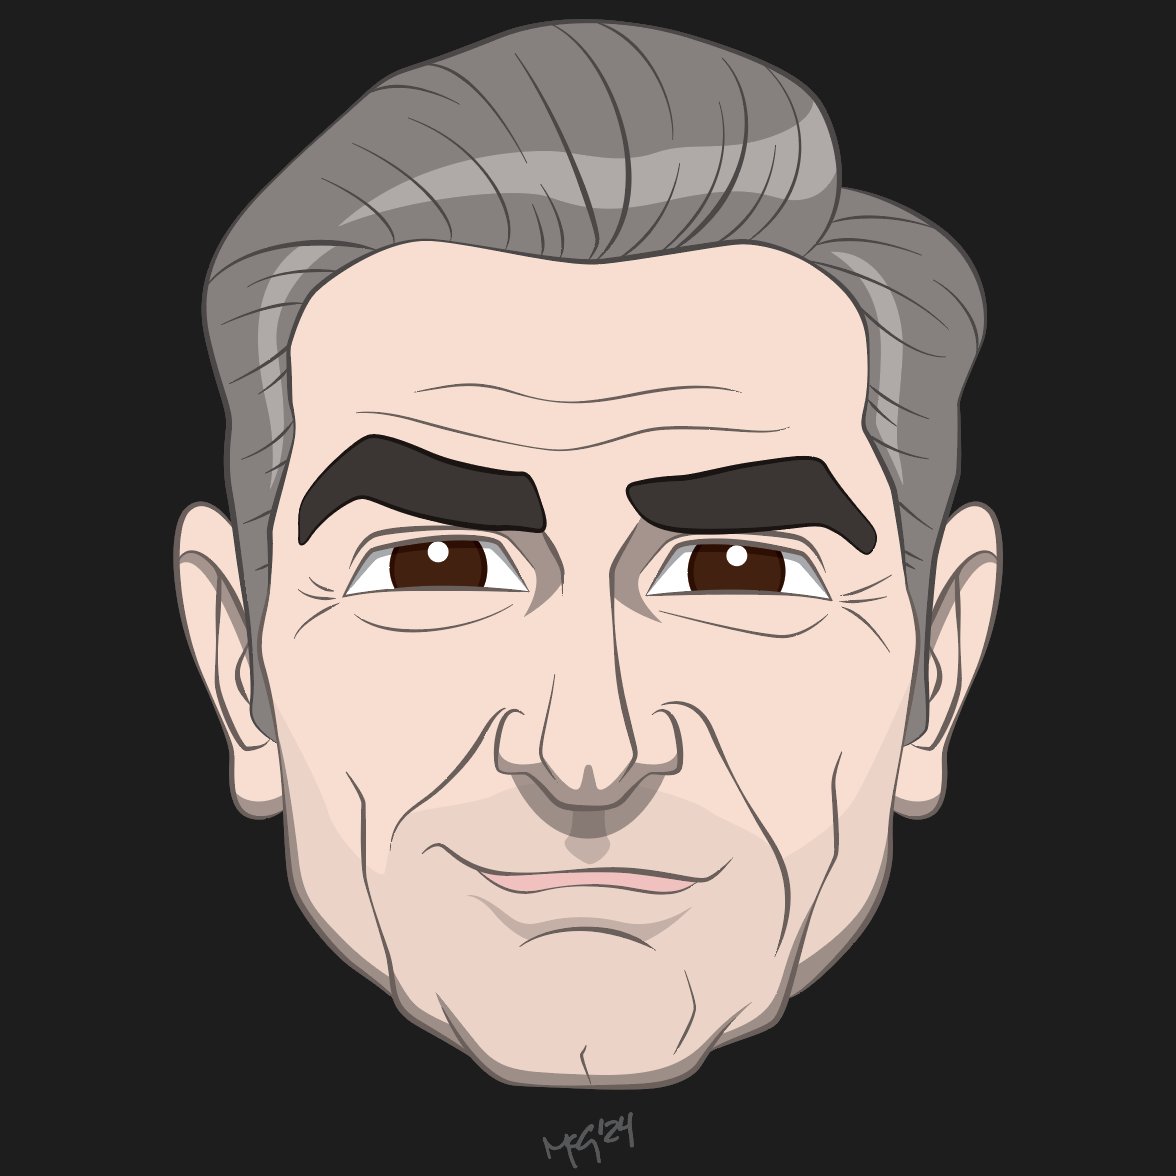 One of the best there is. 7/9, Johnny Rose.
#JohnnyRose #EugeneLevy #SchittsCreek #Caricature